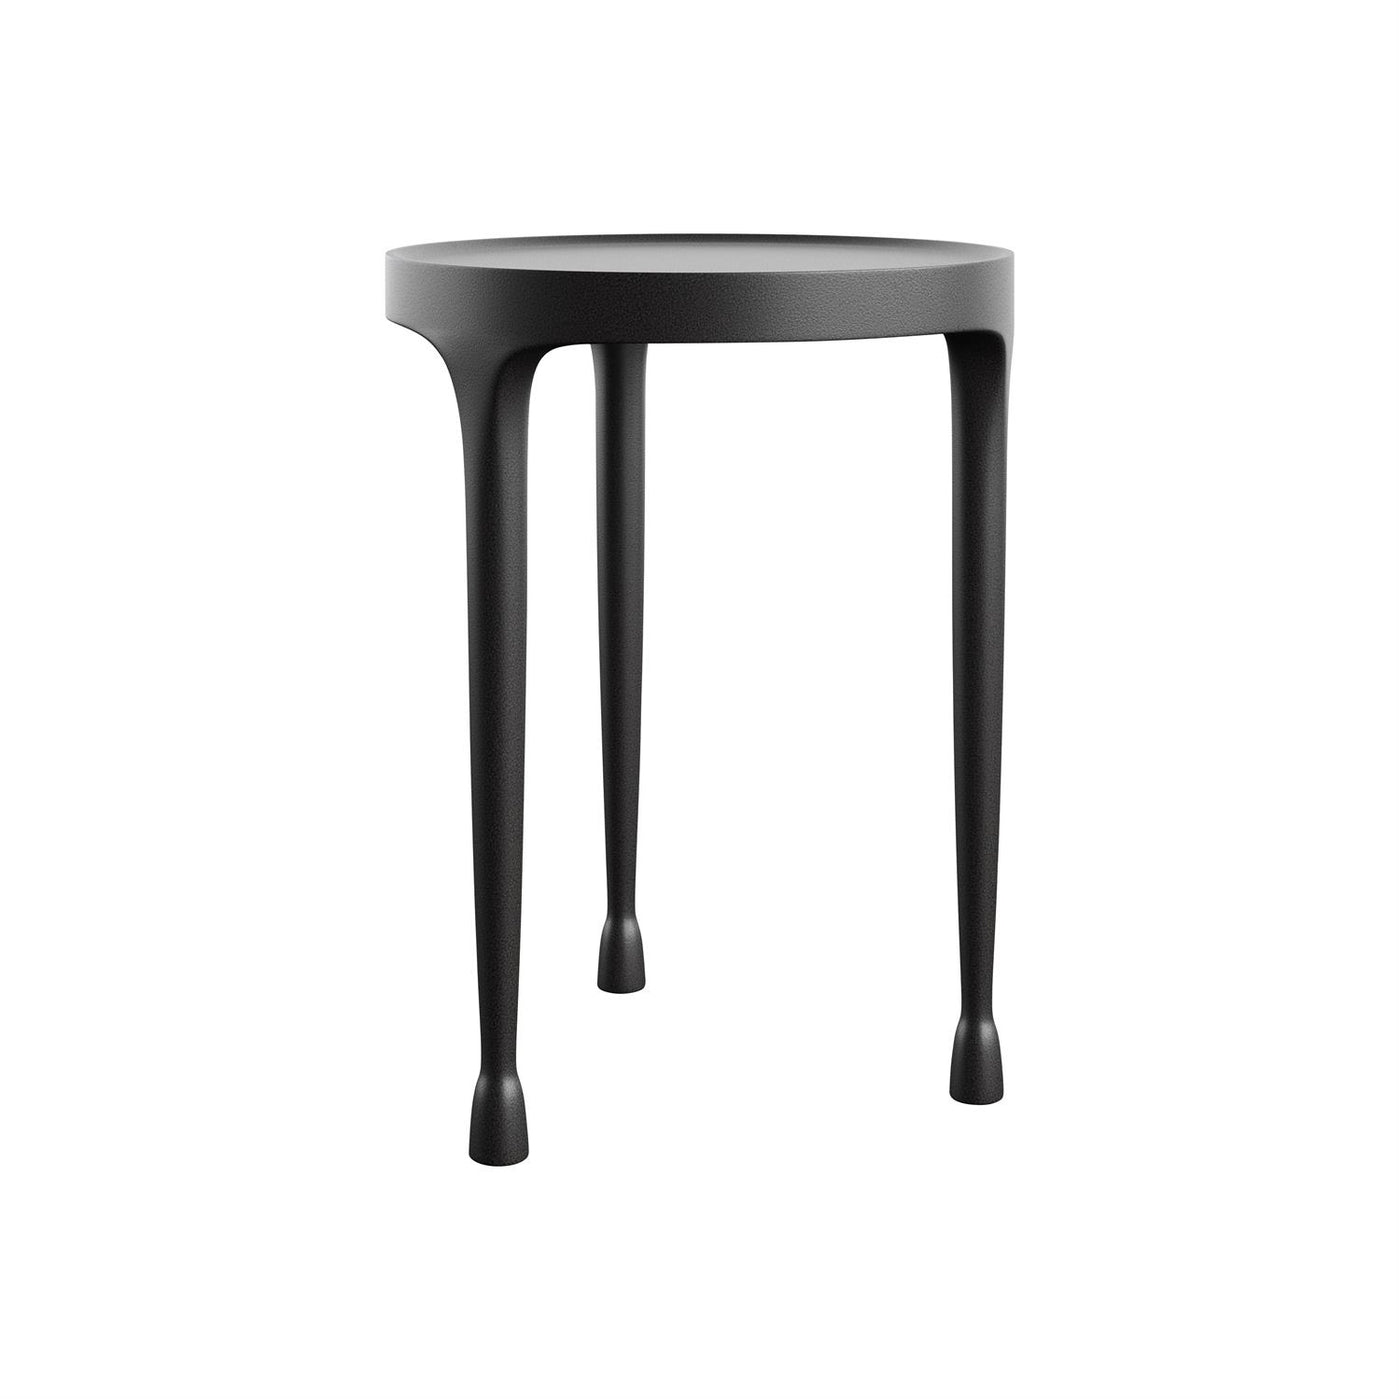 ACCENT TABLE 3 LEGS & BASIN TOP